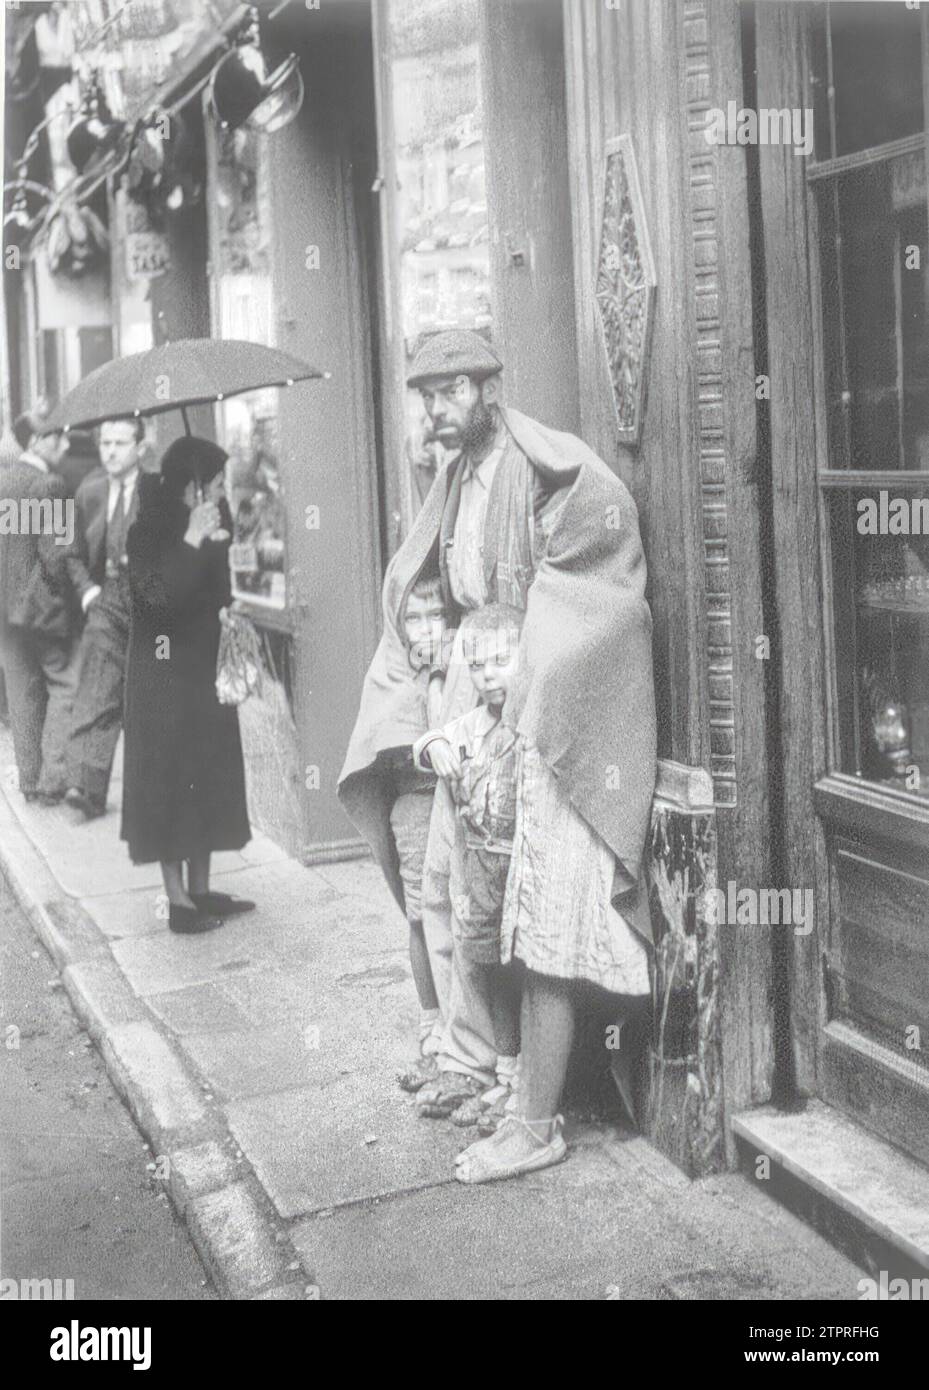 'Photography and society in Franco's Spain', third volume of 'Las Fuentes de la memoria'. A beggar at the door of the Lhardy restaurant in Madrid, 1940. Credit: Album / Archivo ABC / Hermes Pato Stock Photo